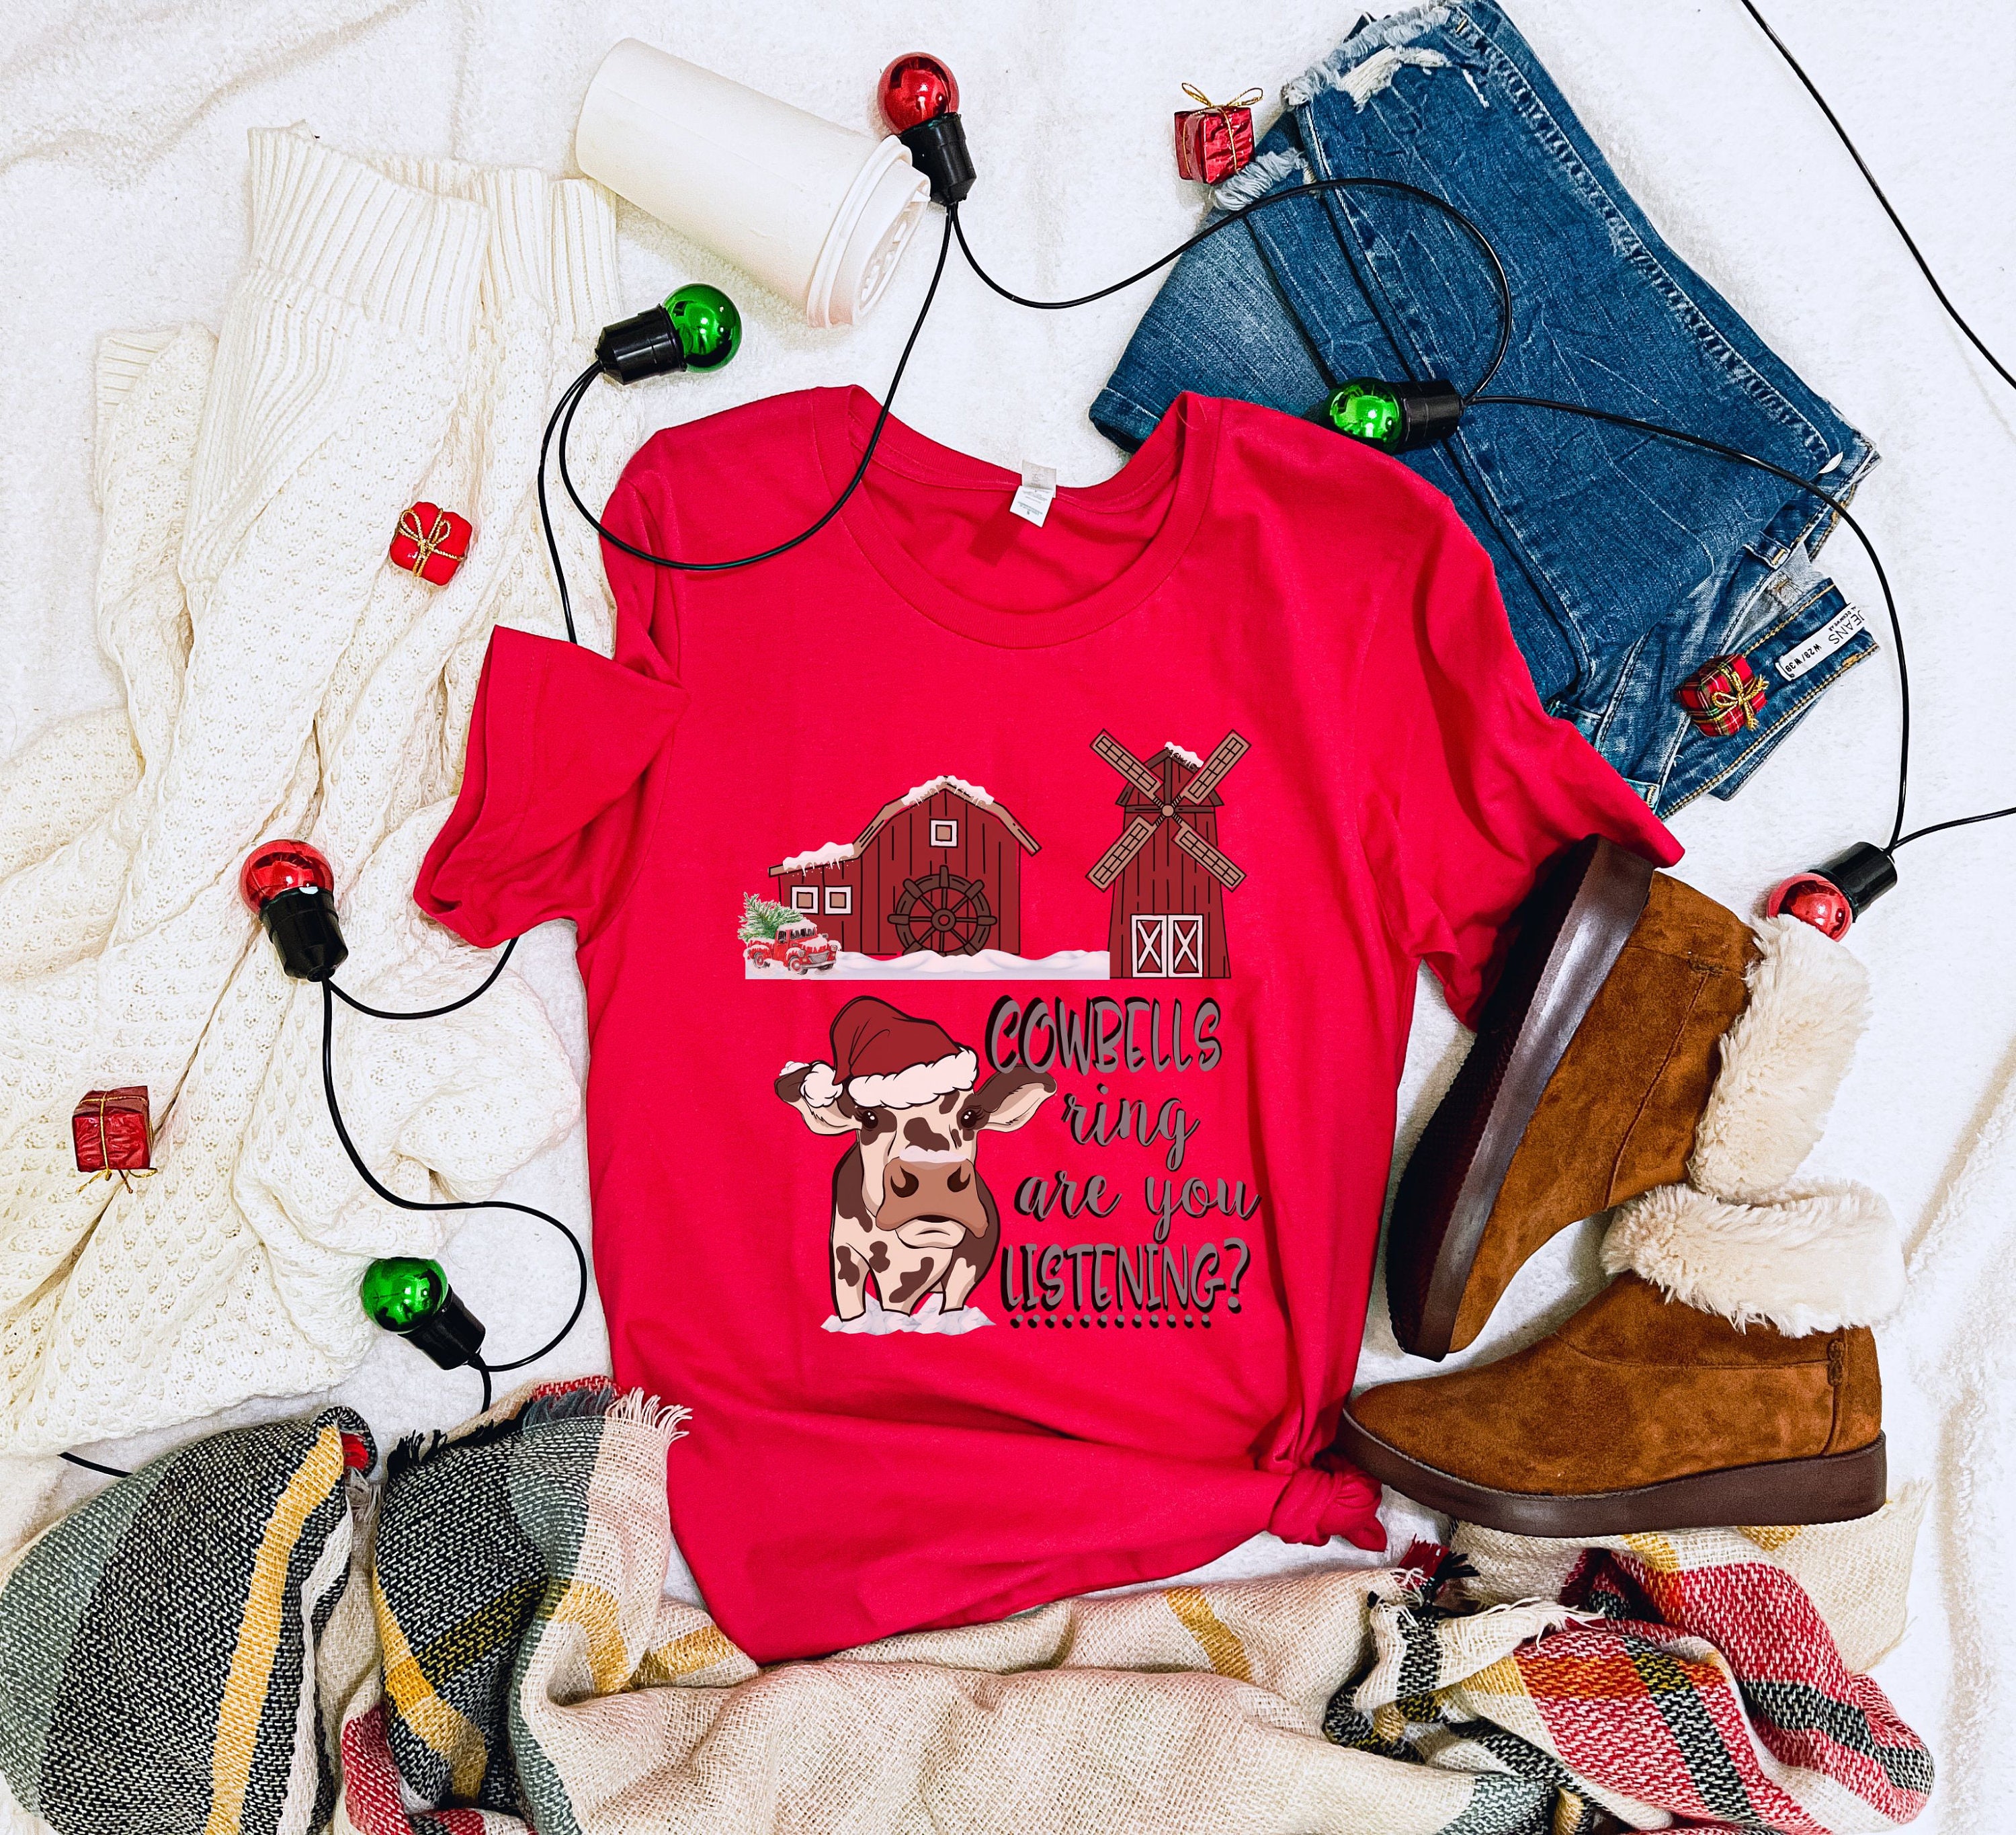 Funny Cow Christmas Shirt, Cow Bells Ring Are You Listening